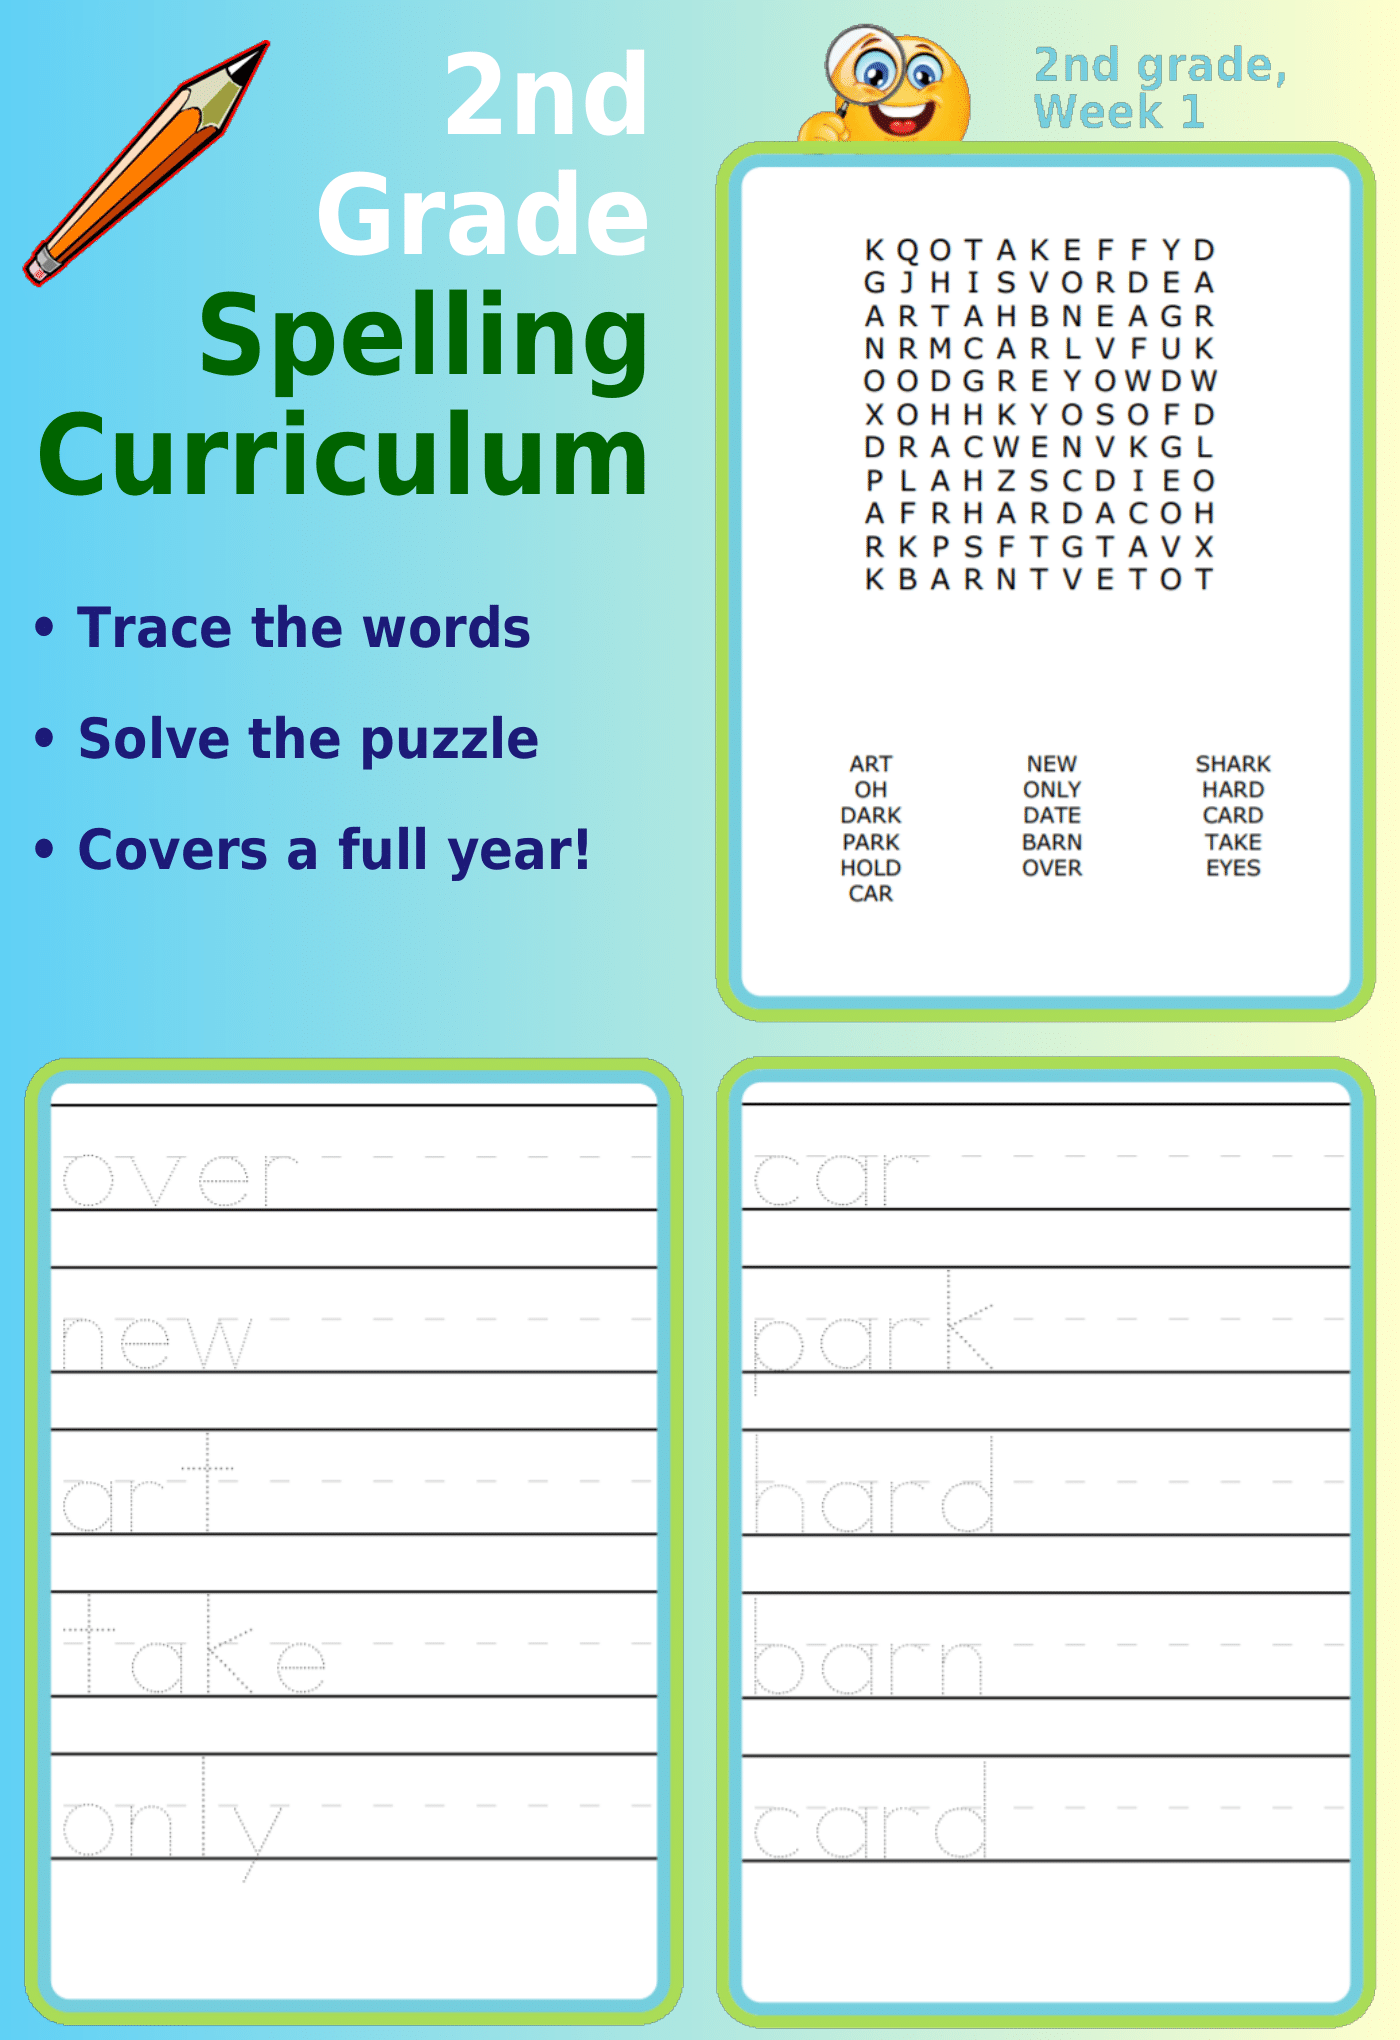 2nd Grade Spelling Curriculum: Word search and letter tracing